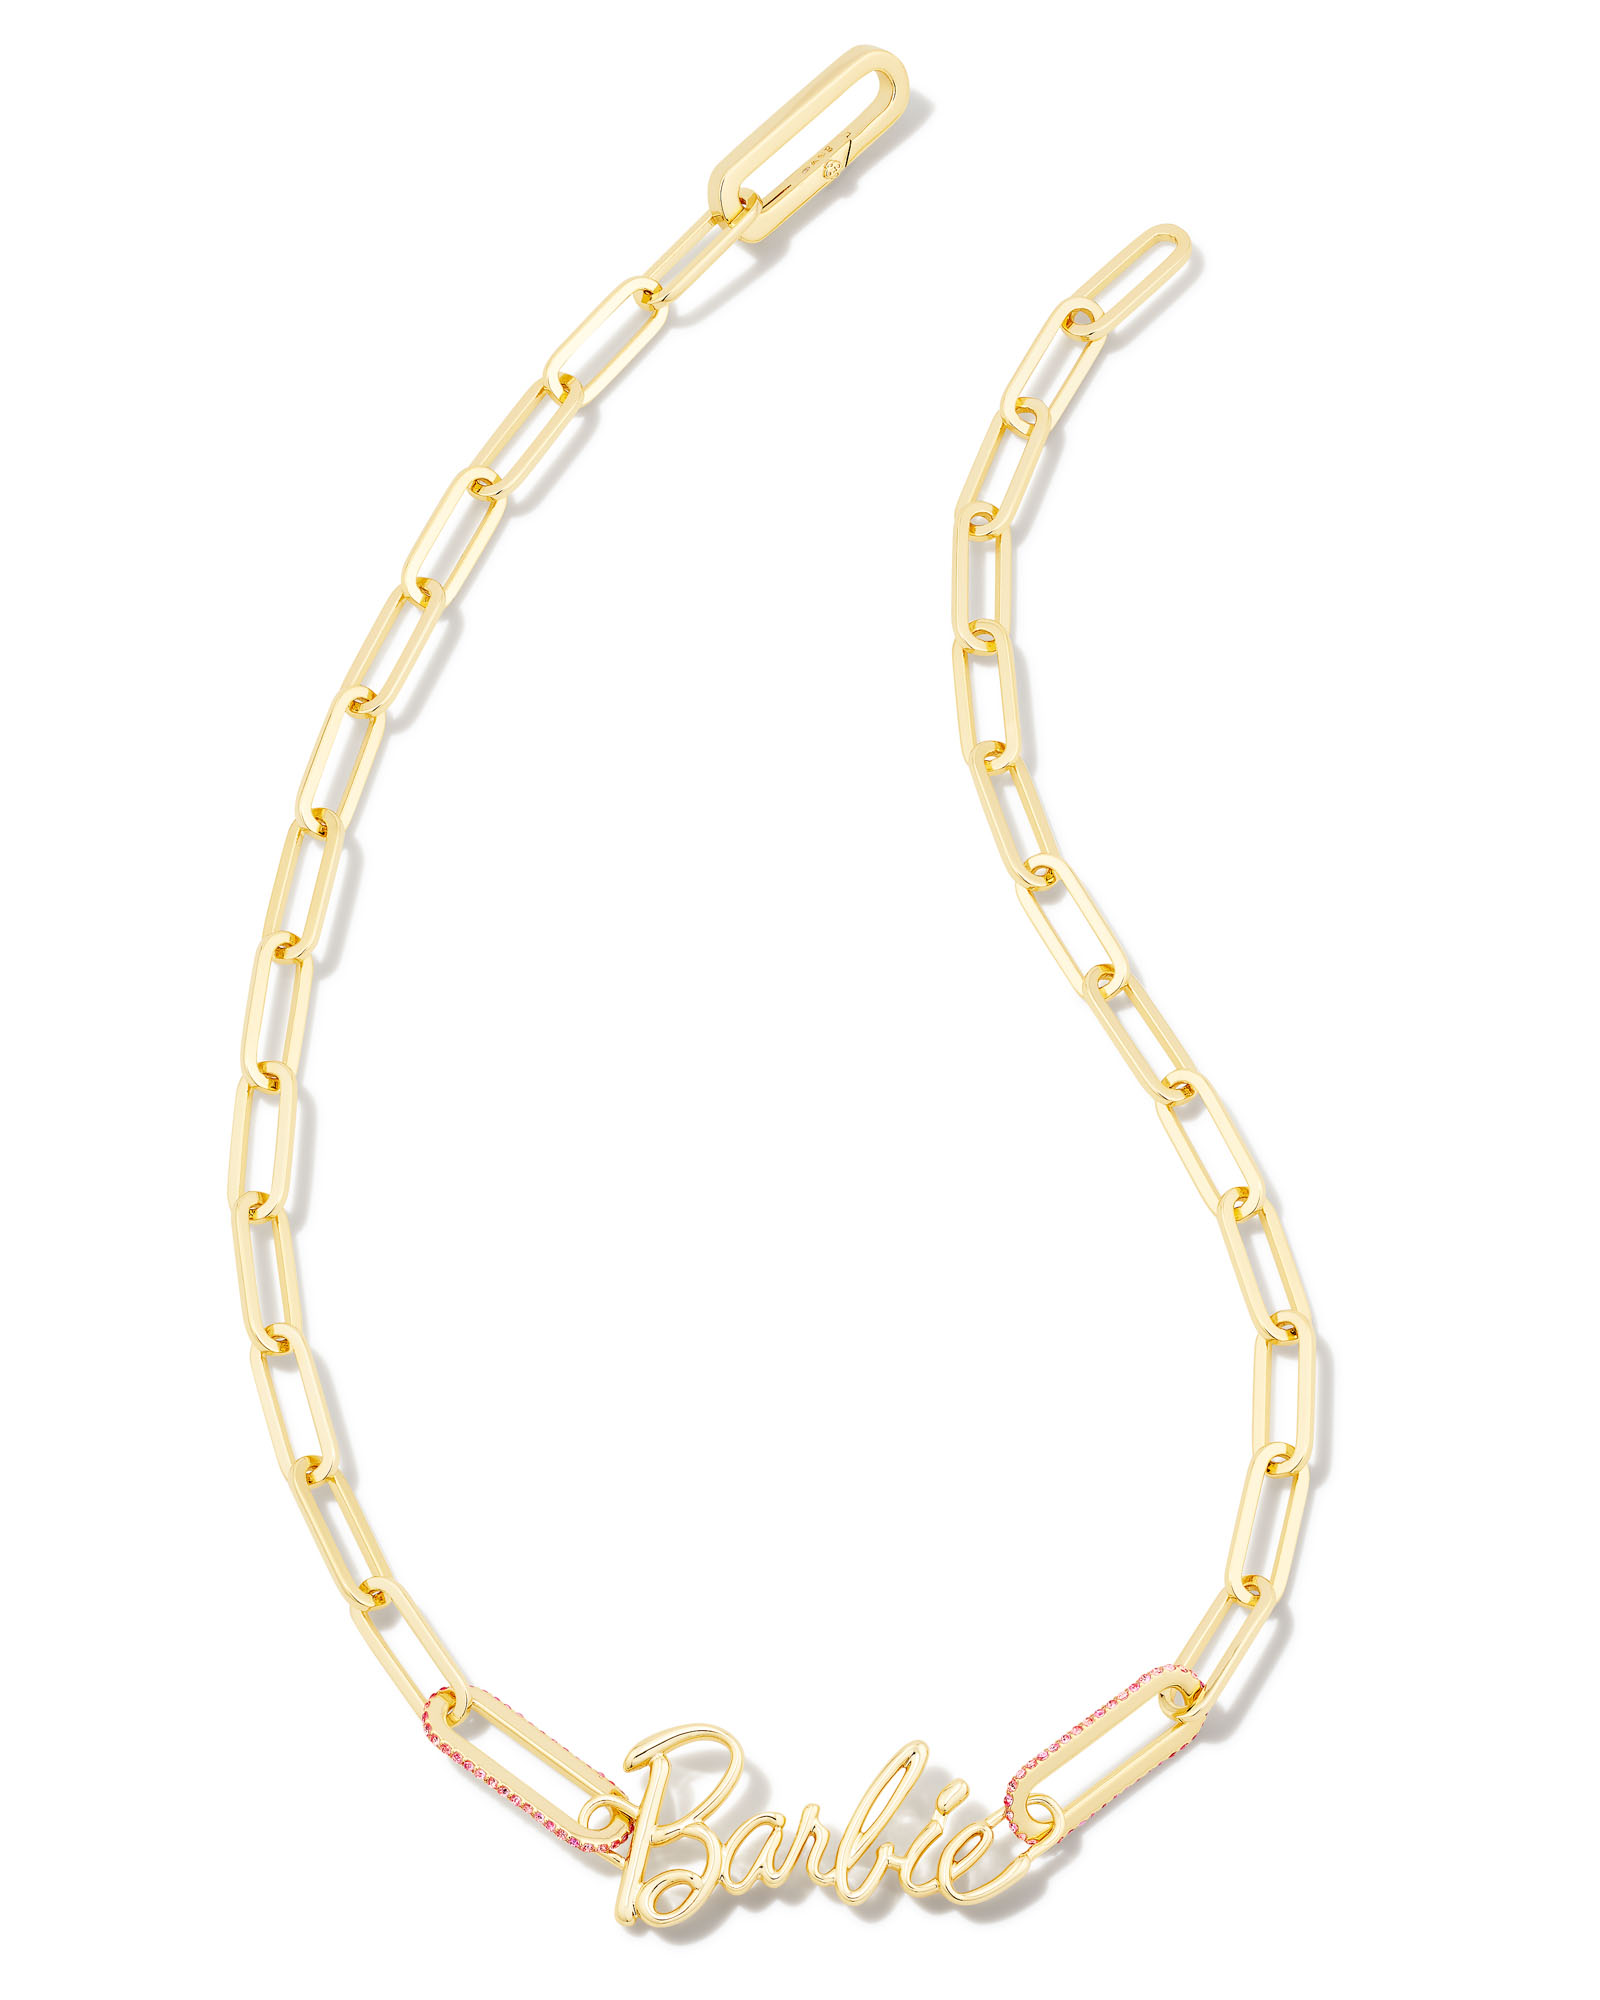 Barbie™ x Kendra Scott Gold Link and Chain Necklace in Pink Crystal |  Kendra Scott